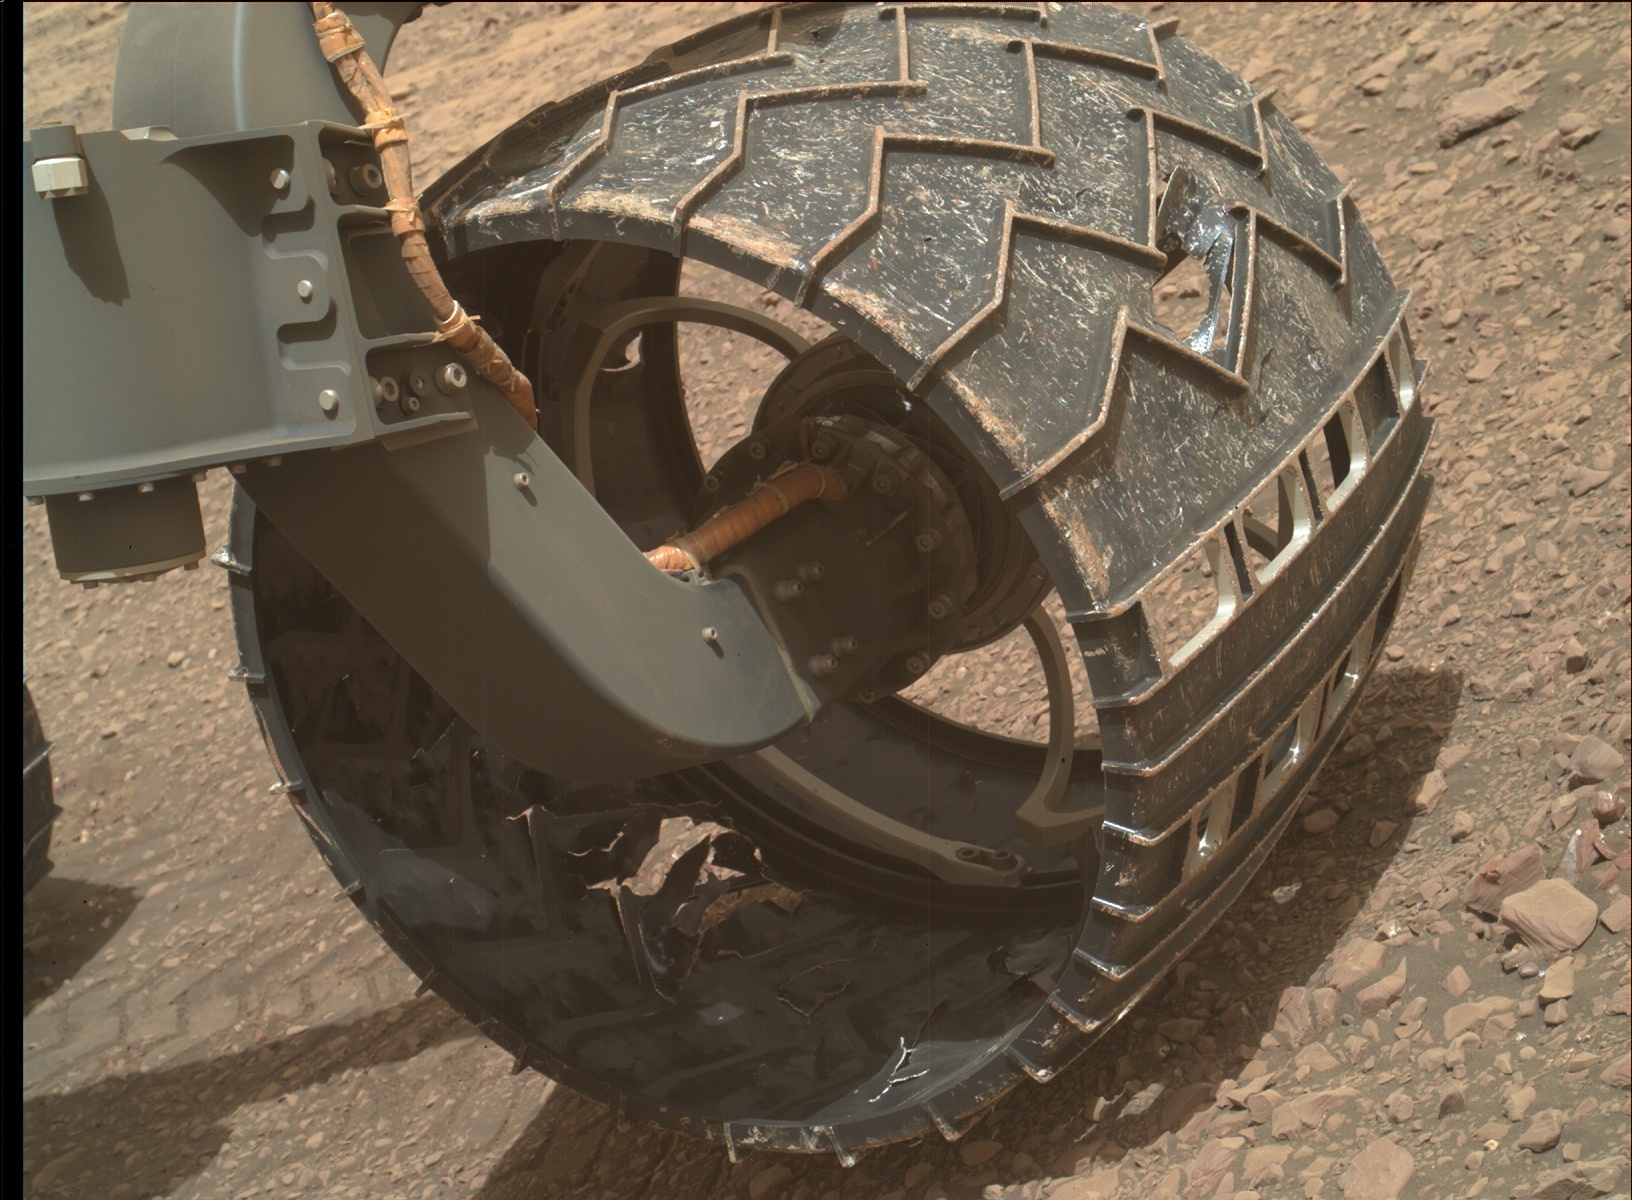 Nasa's Mars rover Curiosity acquired this image using its Mars Hand Lens Imager (MAHLI) on Sol 2030